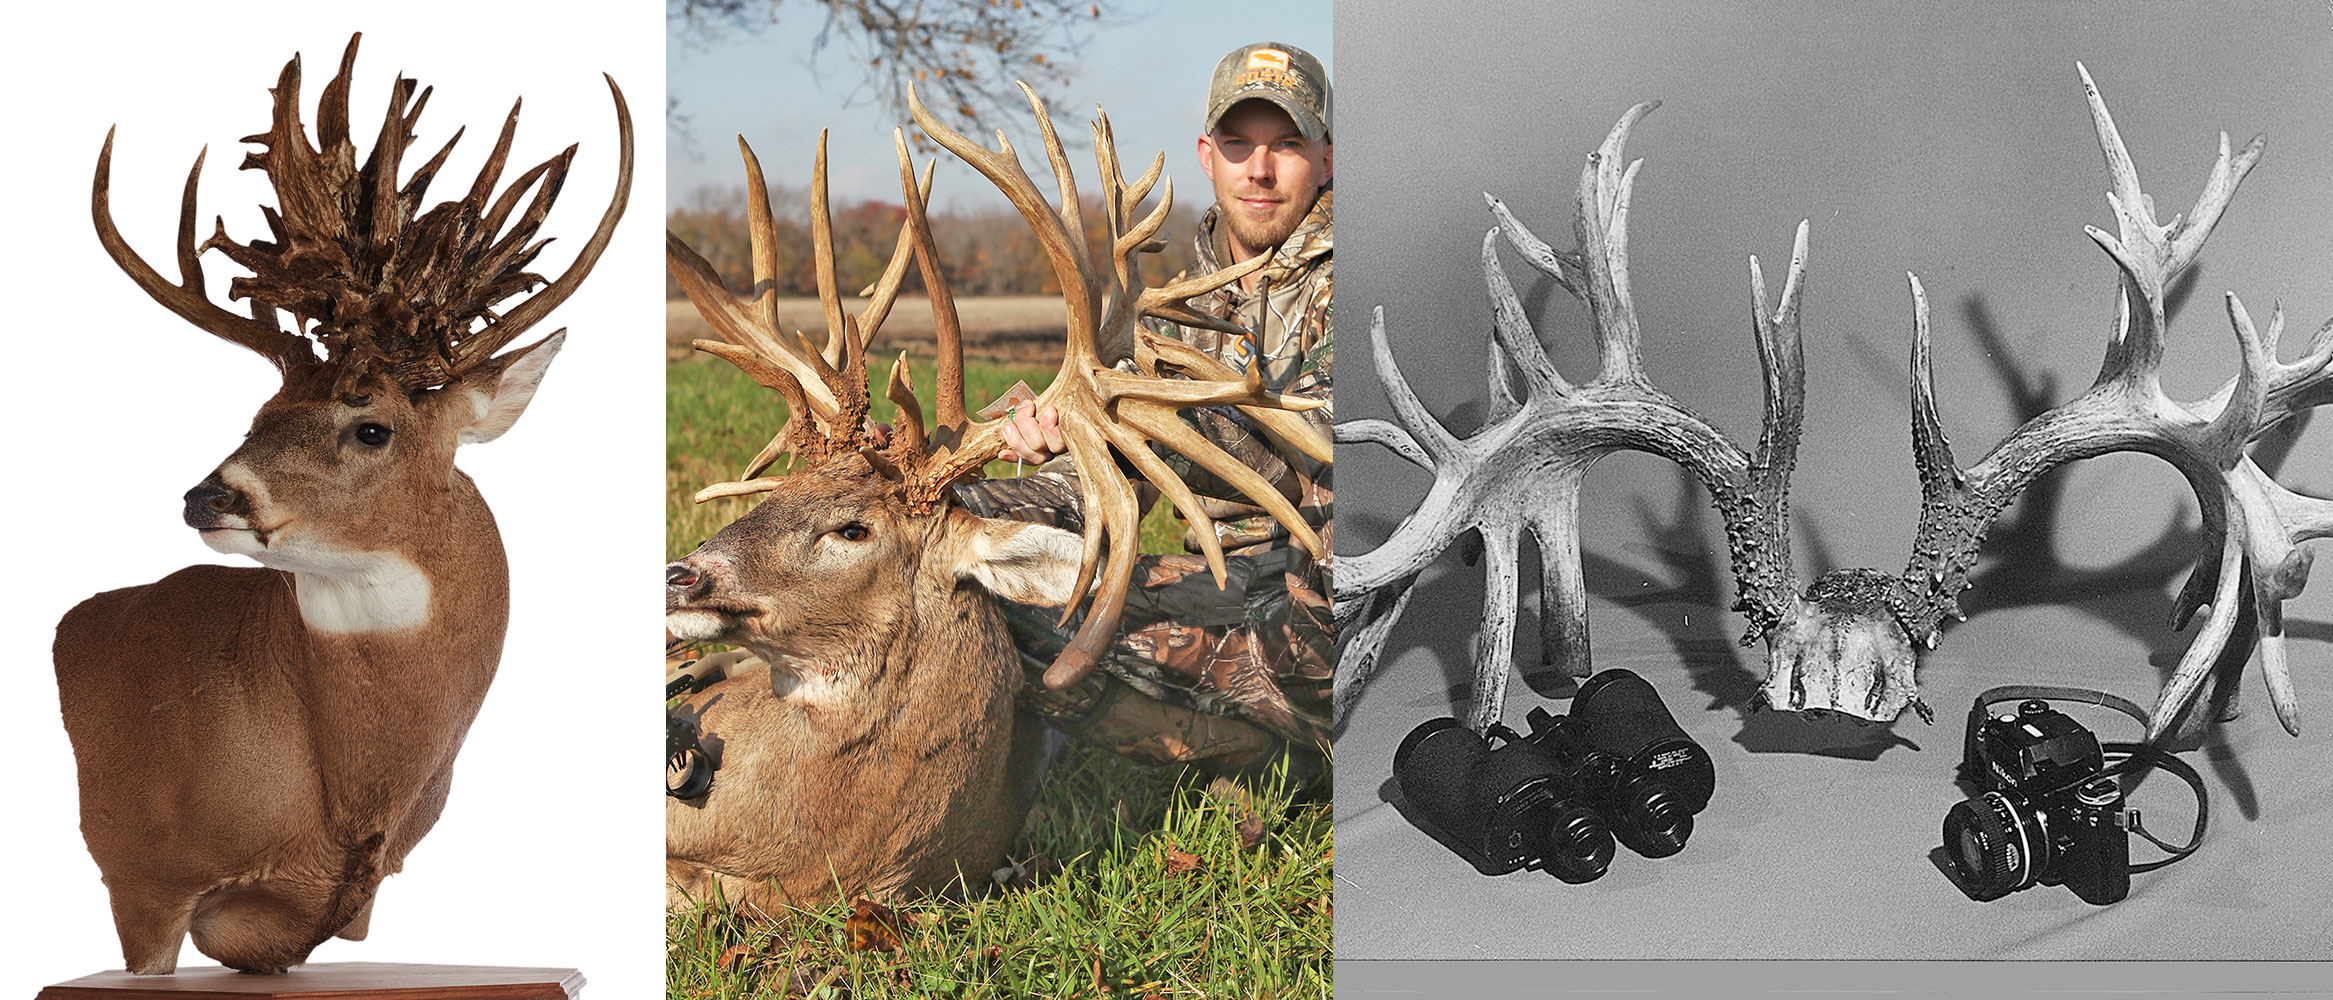 What Are Your Thoughts on These 10 Massive Farm-Raised Deer